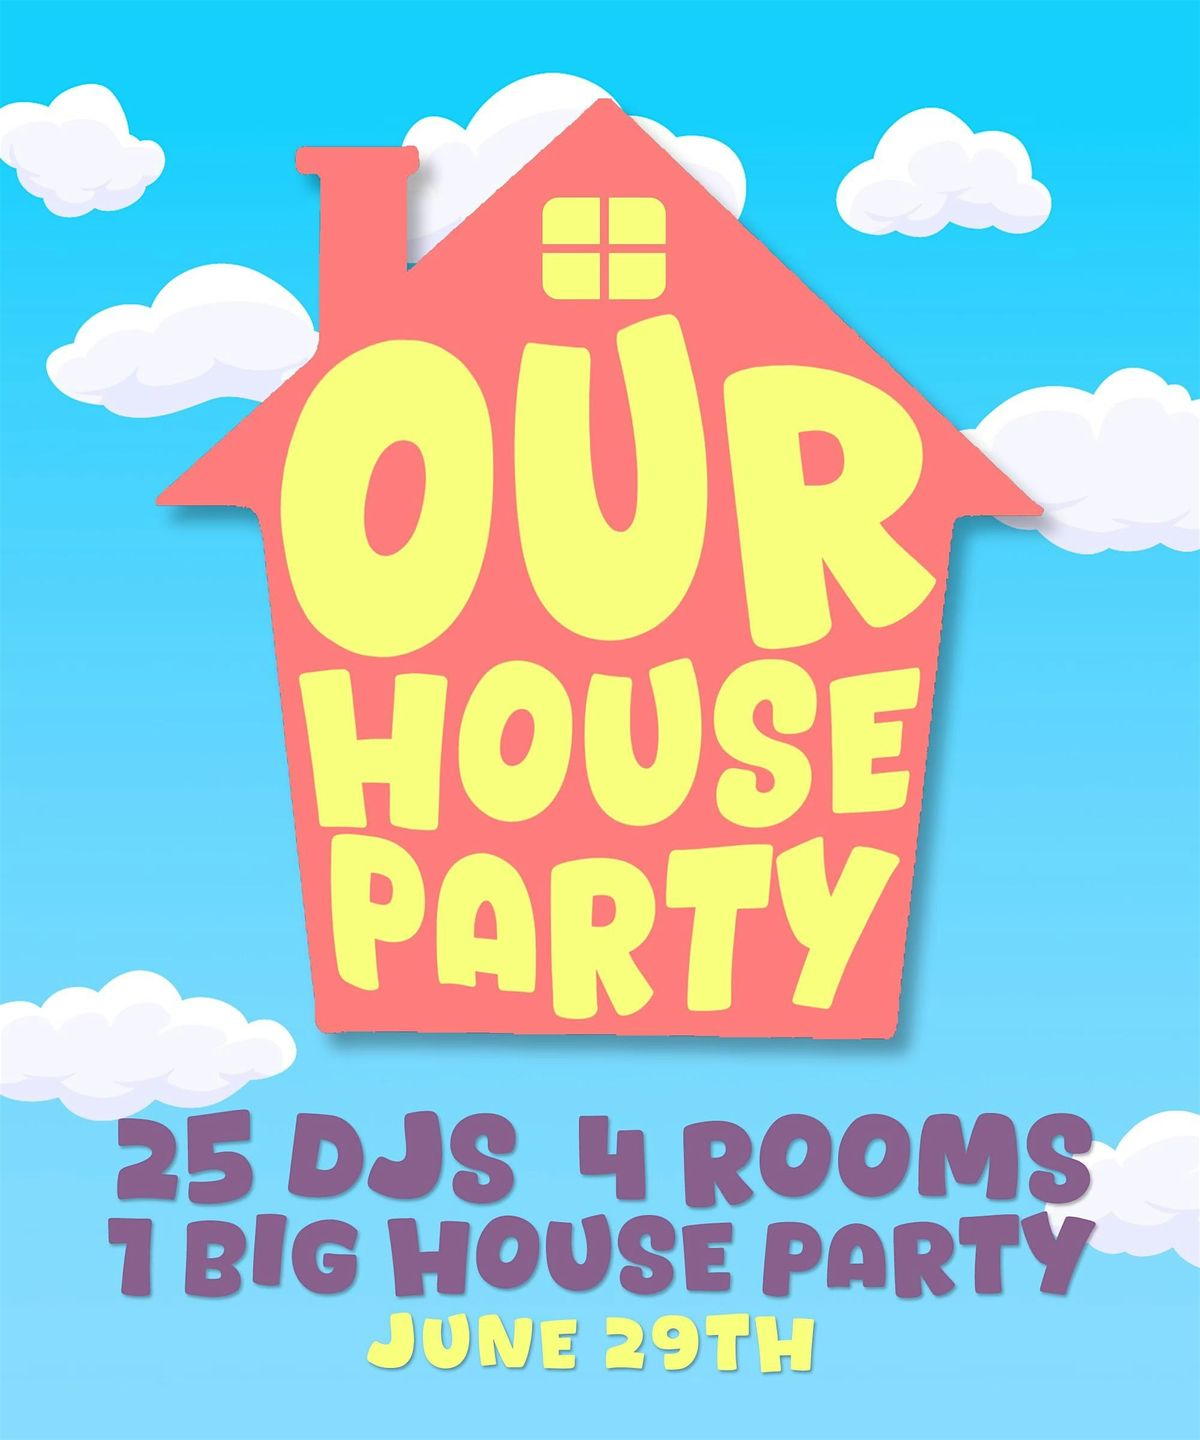 OUR HOUSE PARTY